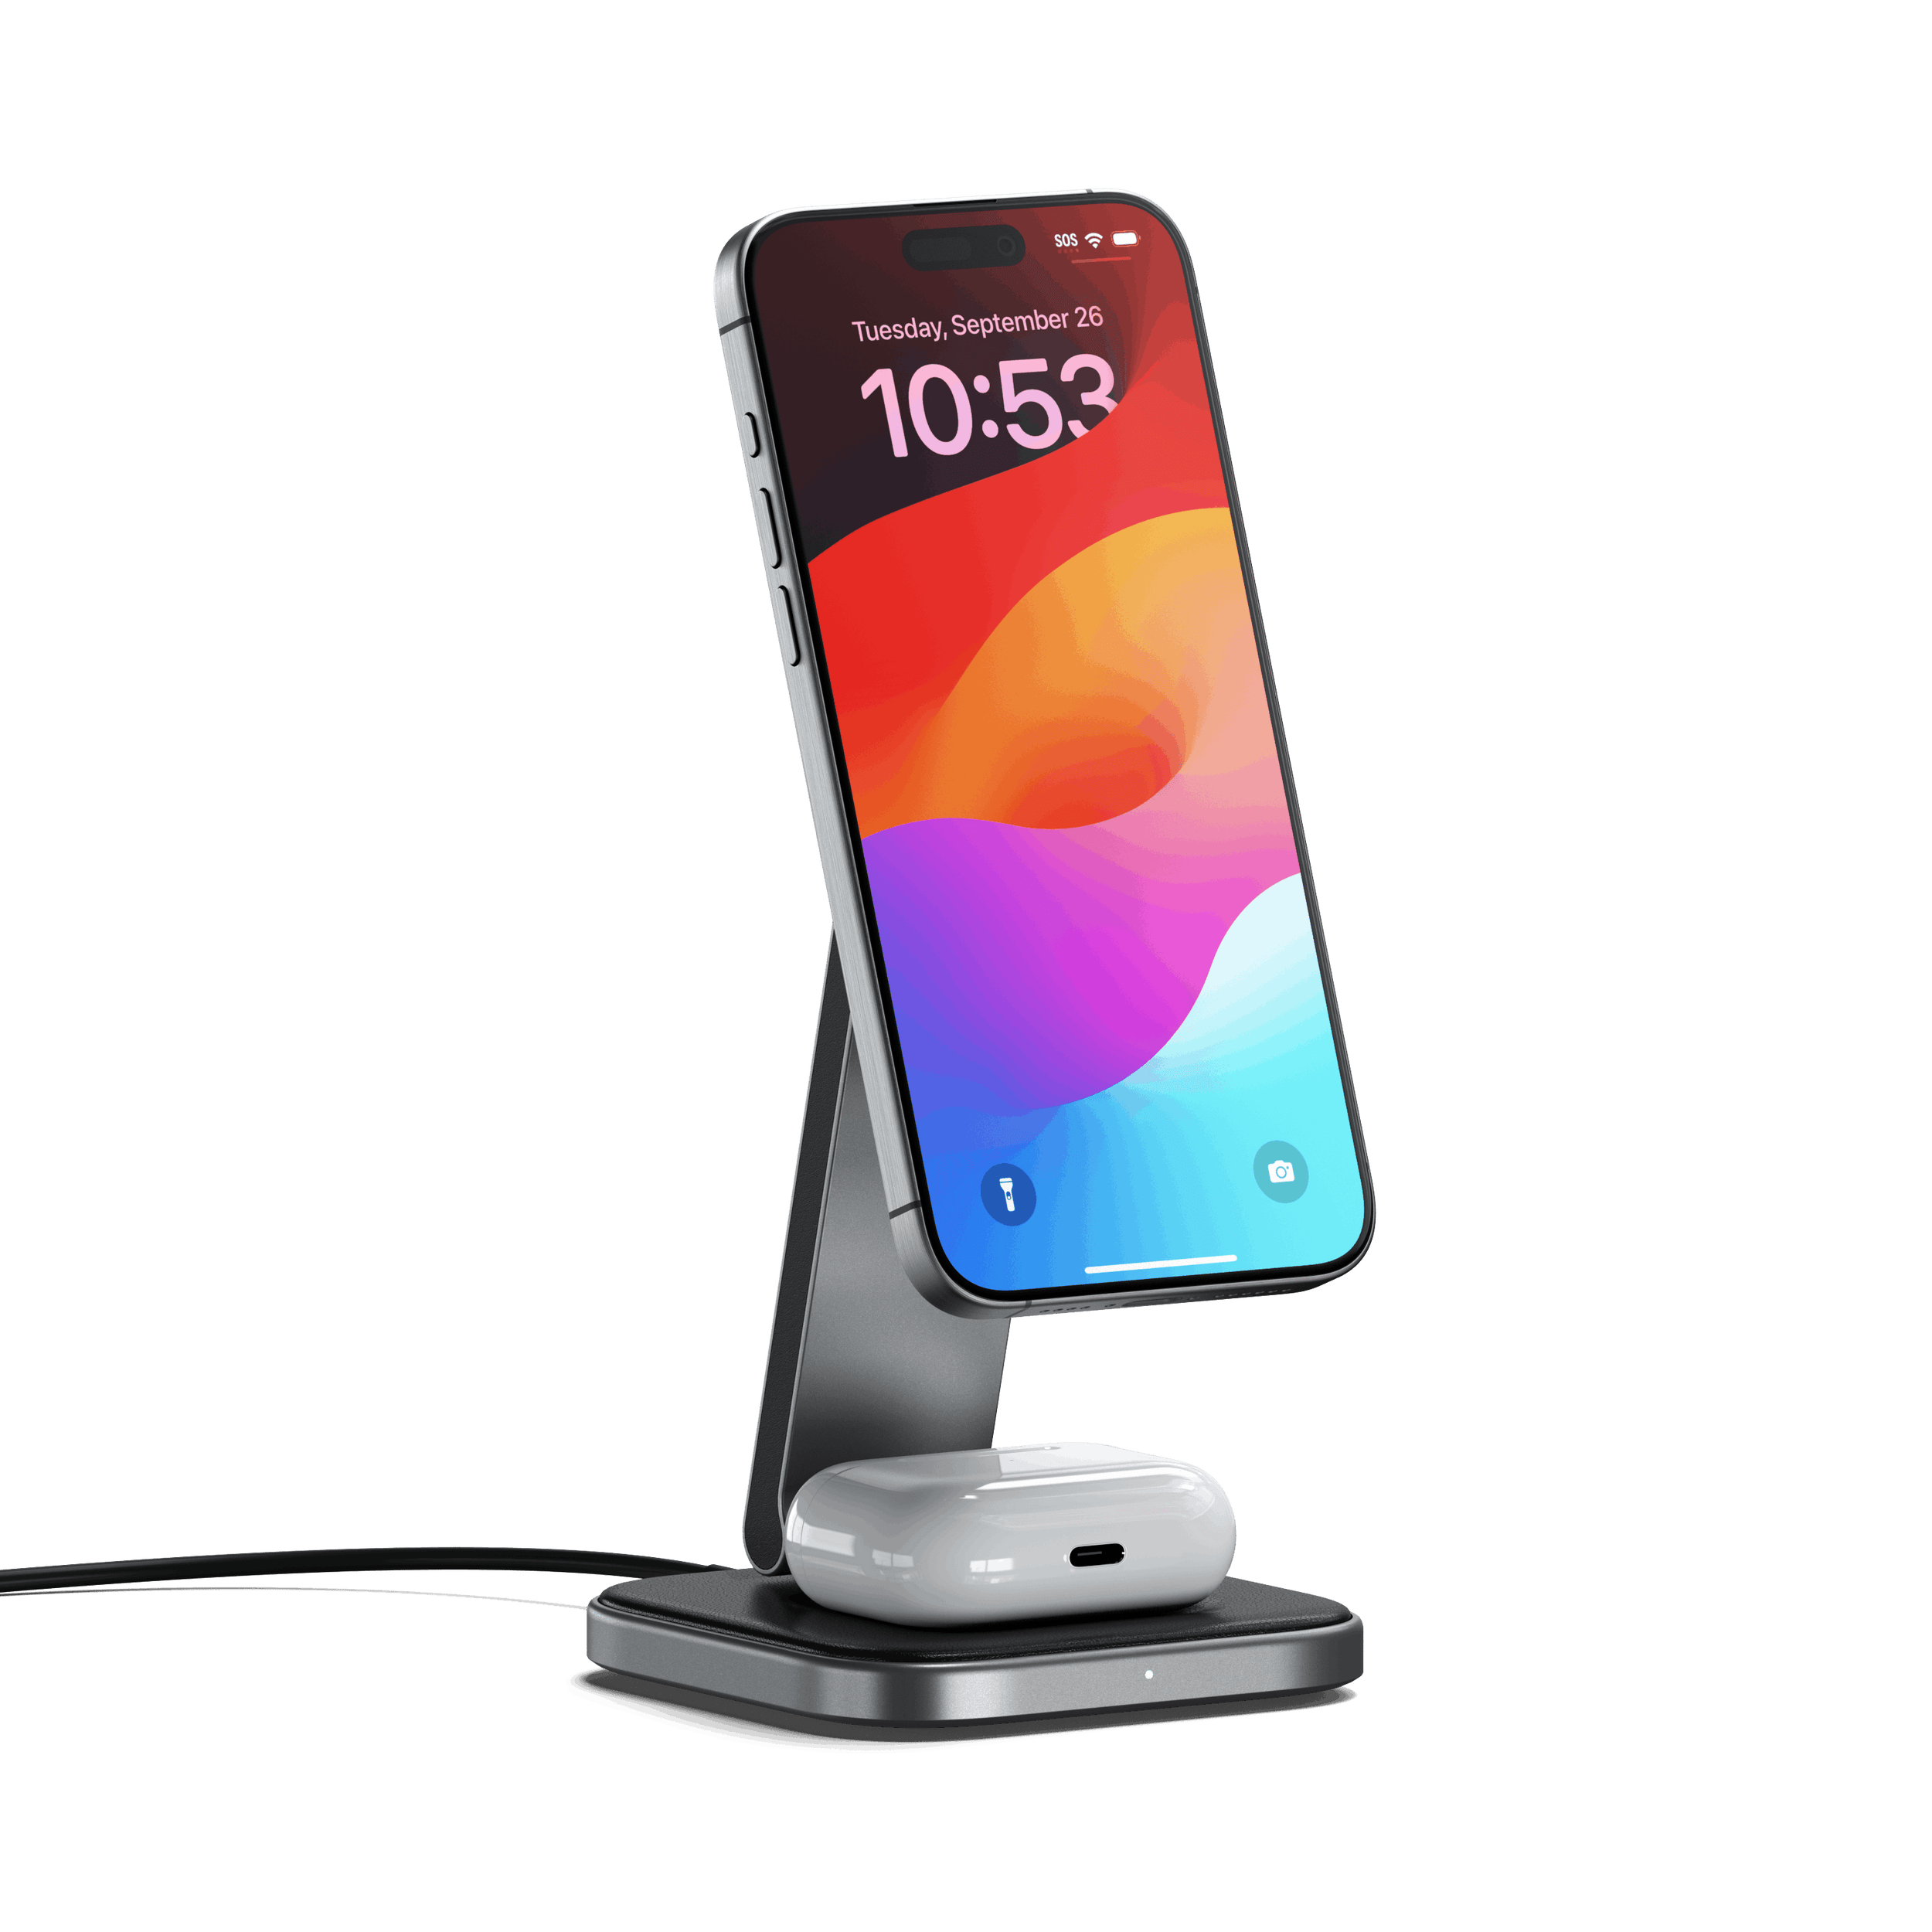 2-in-1 Foldable Qi2 Wireless Charging Stand